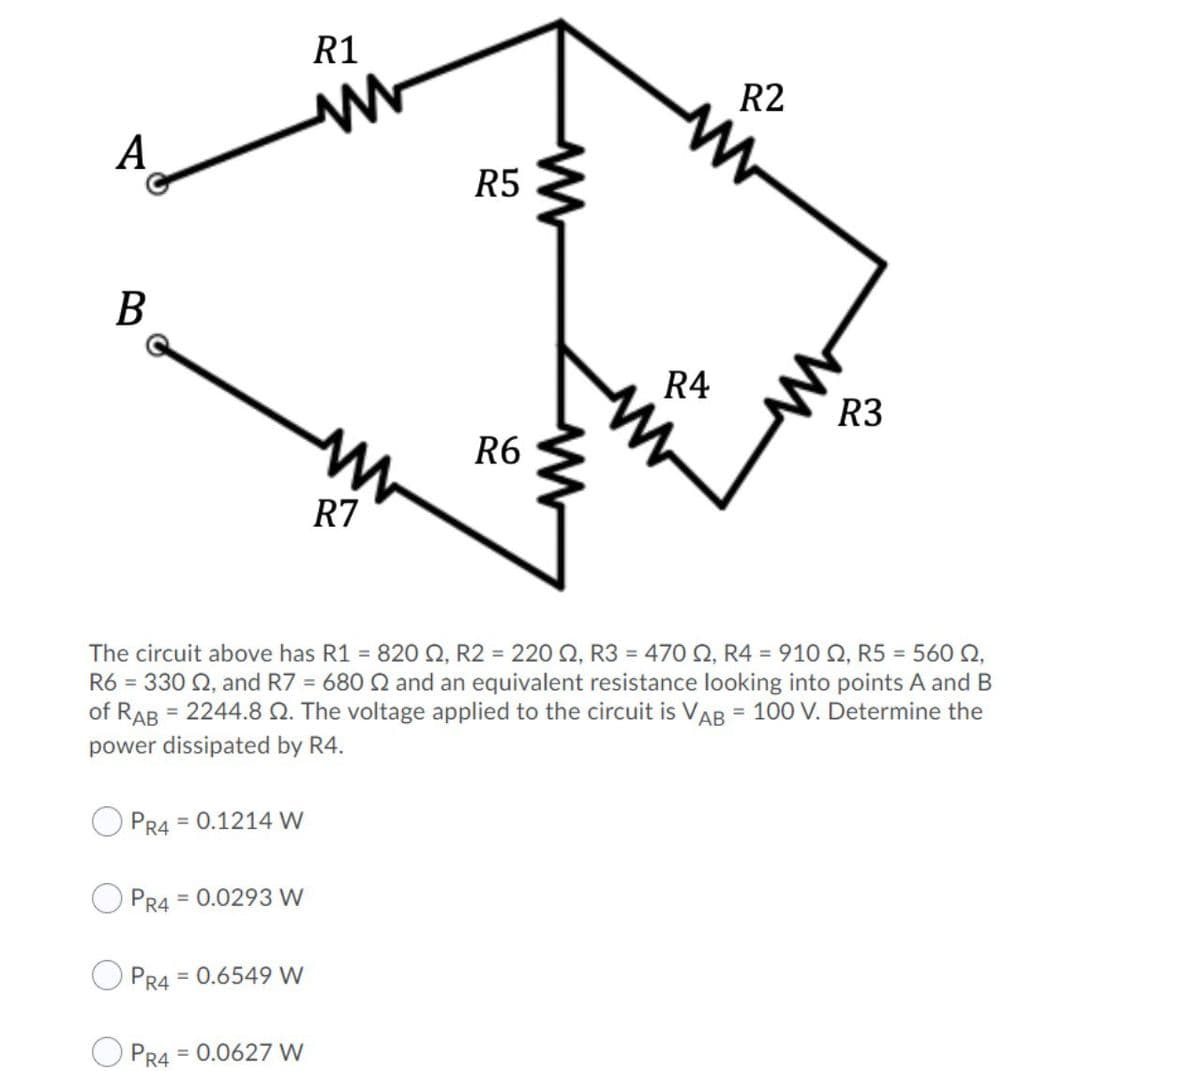 R1
R2
А
R5
B
R4
R3
R6
R7
The circuit above has R1 = 820 Q, R2 = 220 2, R3 = 470 O, R4 = 910 2, R5 = 560 N,
R6 = 330 Q, and R7 = 680 Q and an equivalent resistance looking into points A and B
of RAB = 2244.8 Q. The voltage applied to the circuit is VAB = 100 V. Determine the
%3D
power dissipated by R4.
PR4
= 0.1214 W
PR4
= 0.0293 W
PR4
= 0.6549 W
= 0.0627 W
PR4
